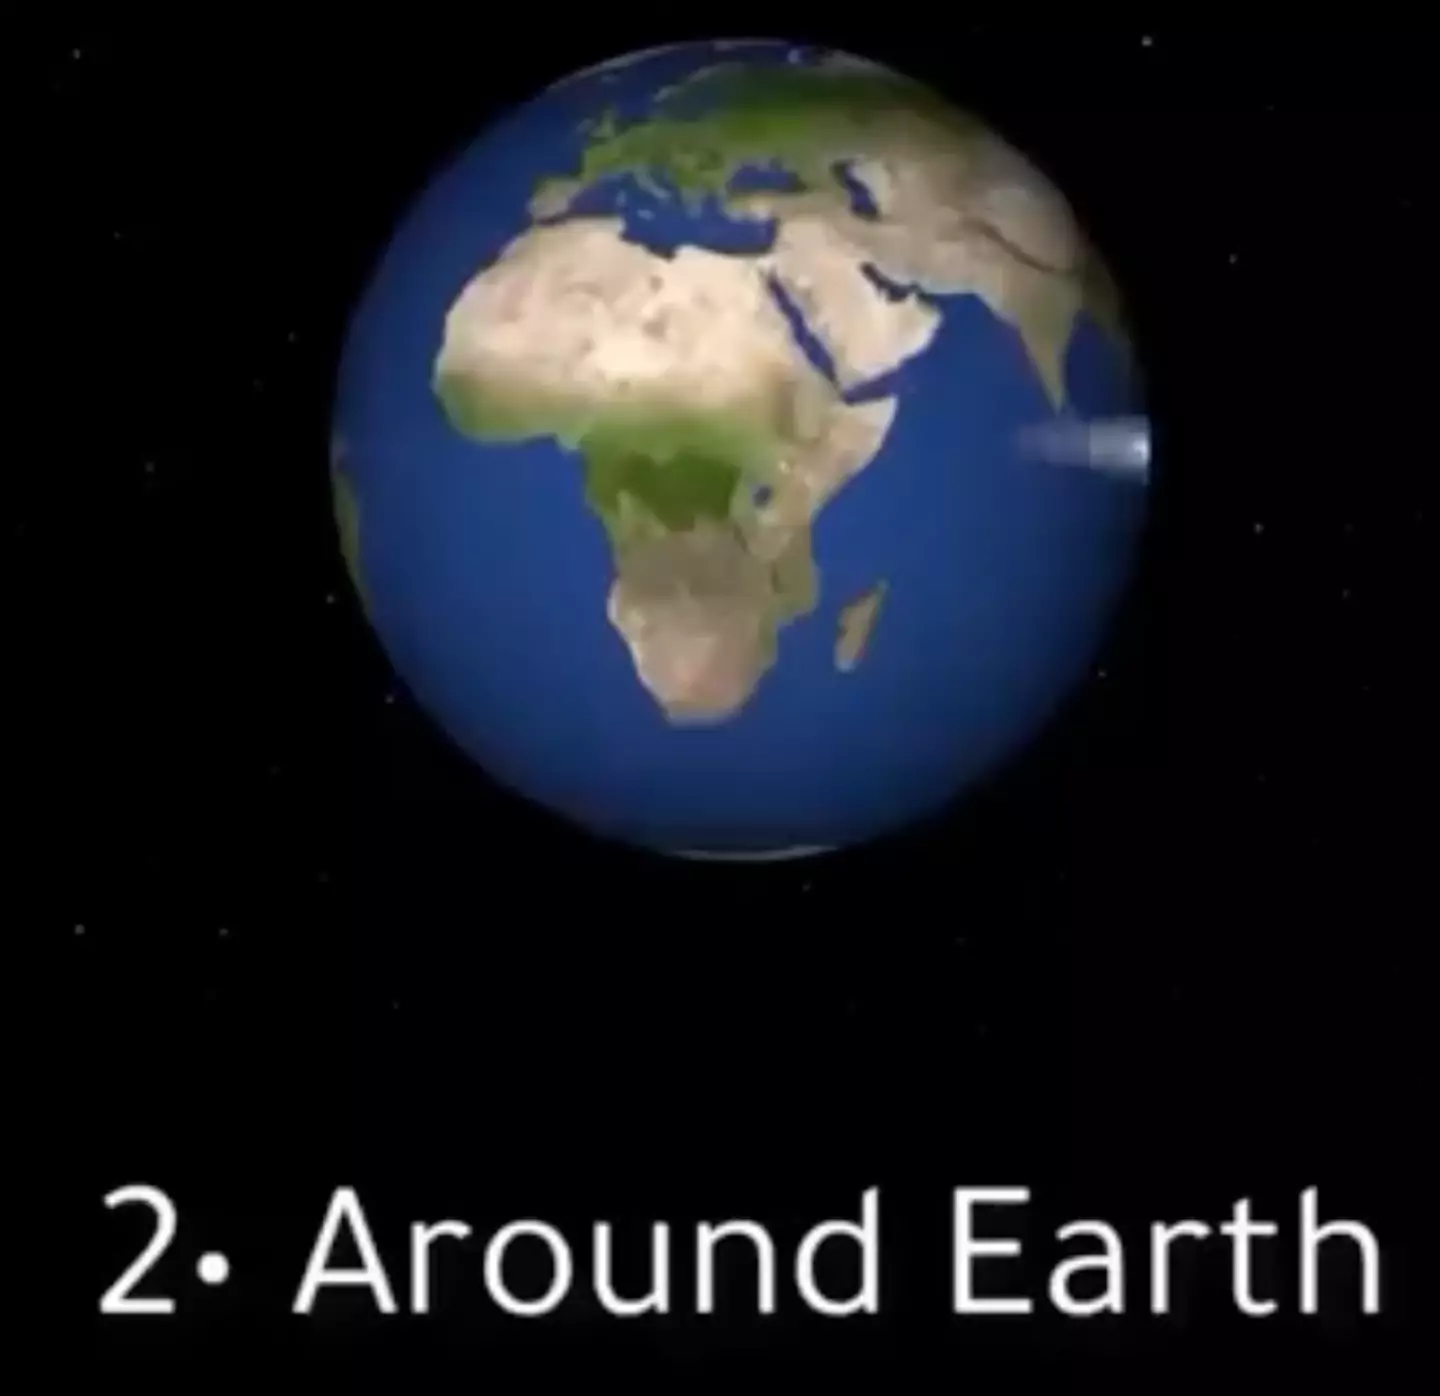 How fast light travels around Earth.